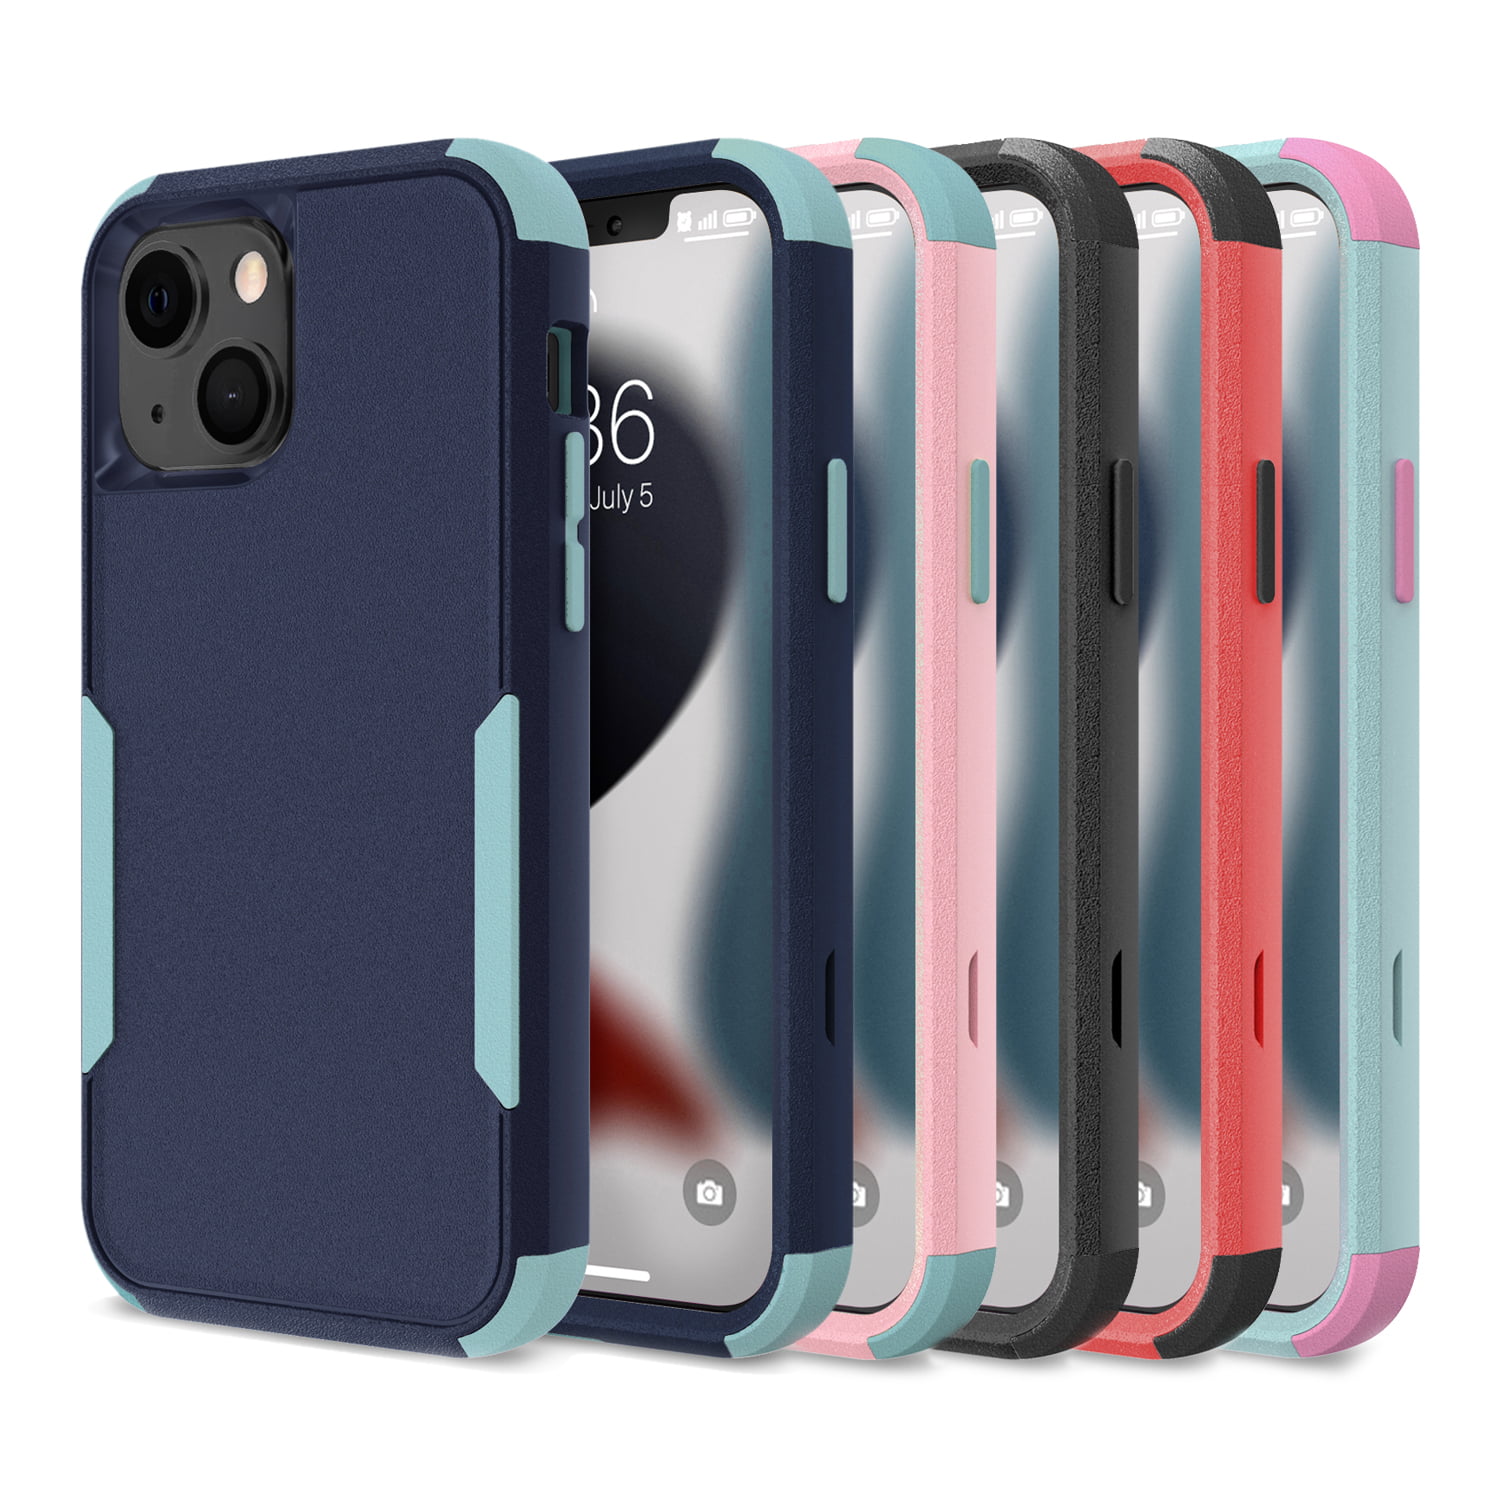 2019 Release, 6.7 inch Shockproof Impact Resist Durable Phone Case -Fantasy E-Began Case for Alcatel 3V Full-Body Protective Rugged Matte Bumper Cover with Built-in Screen Protector Marble Design 